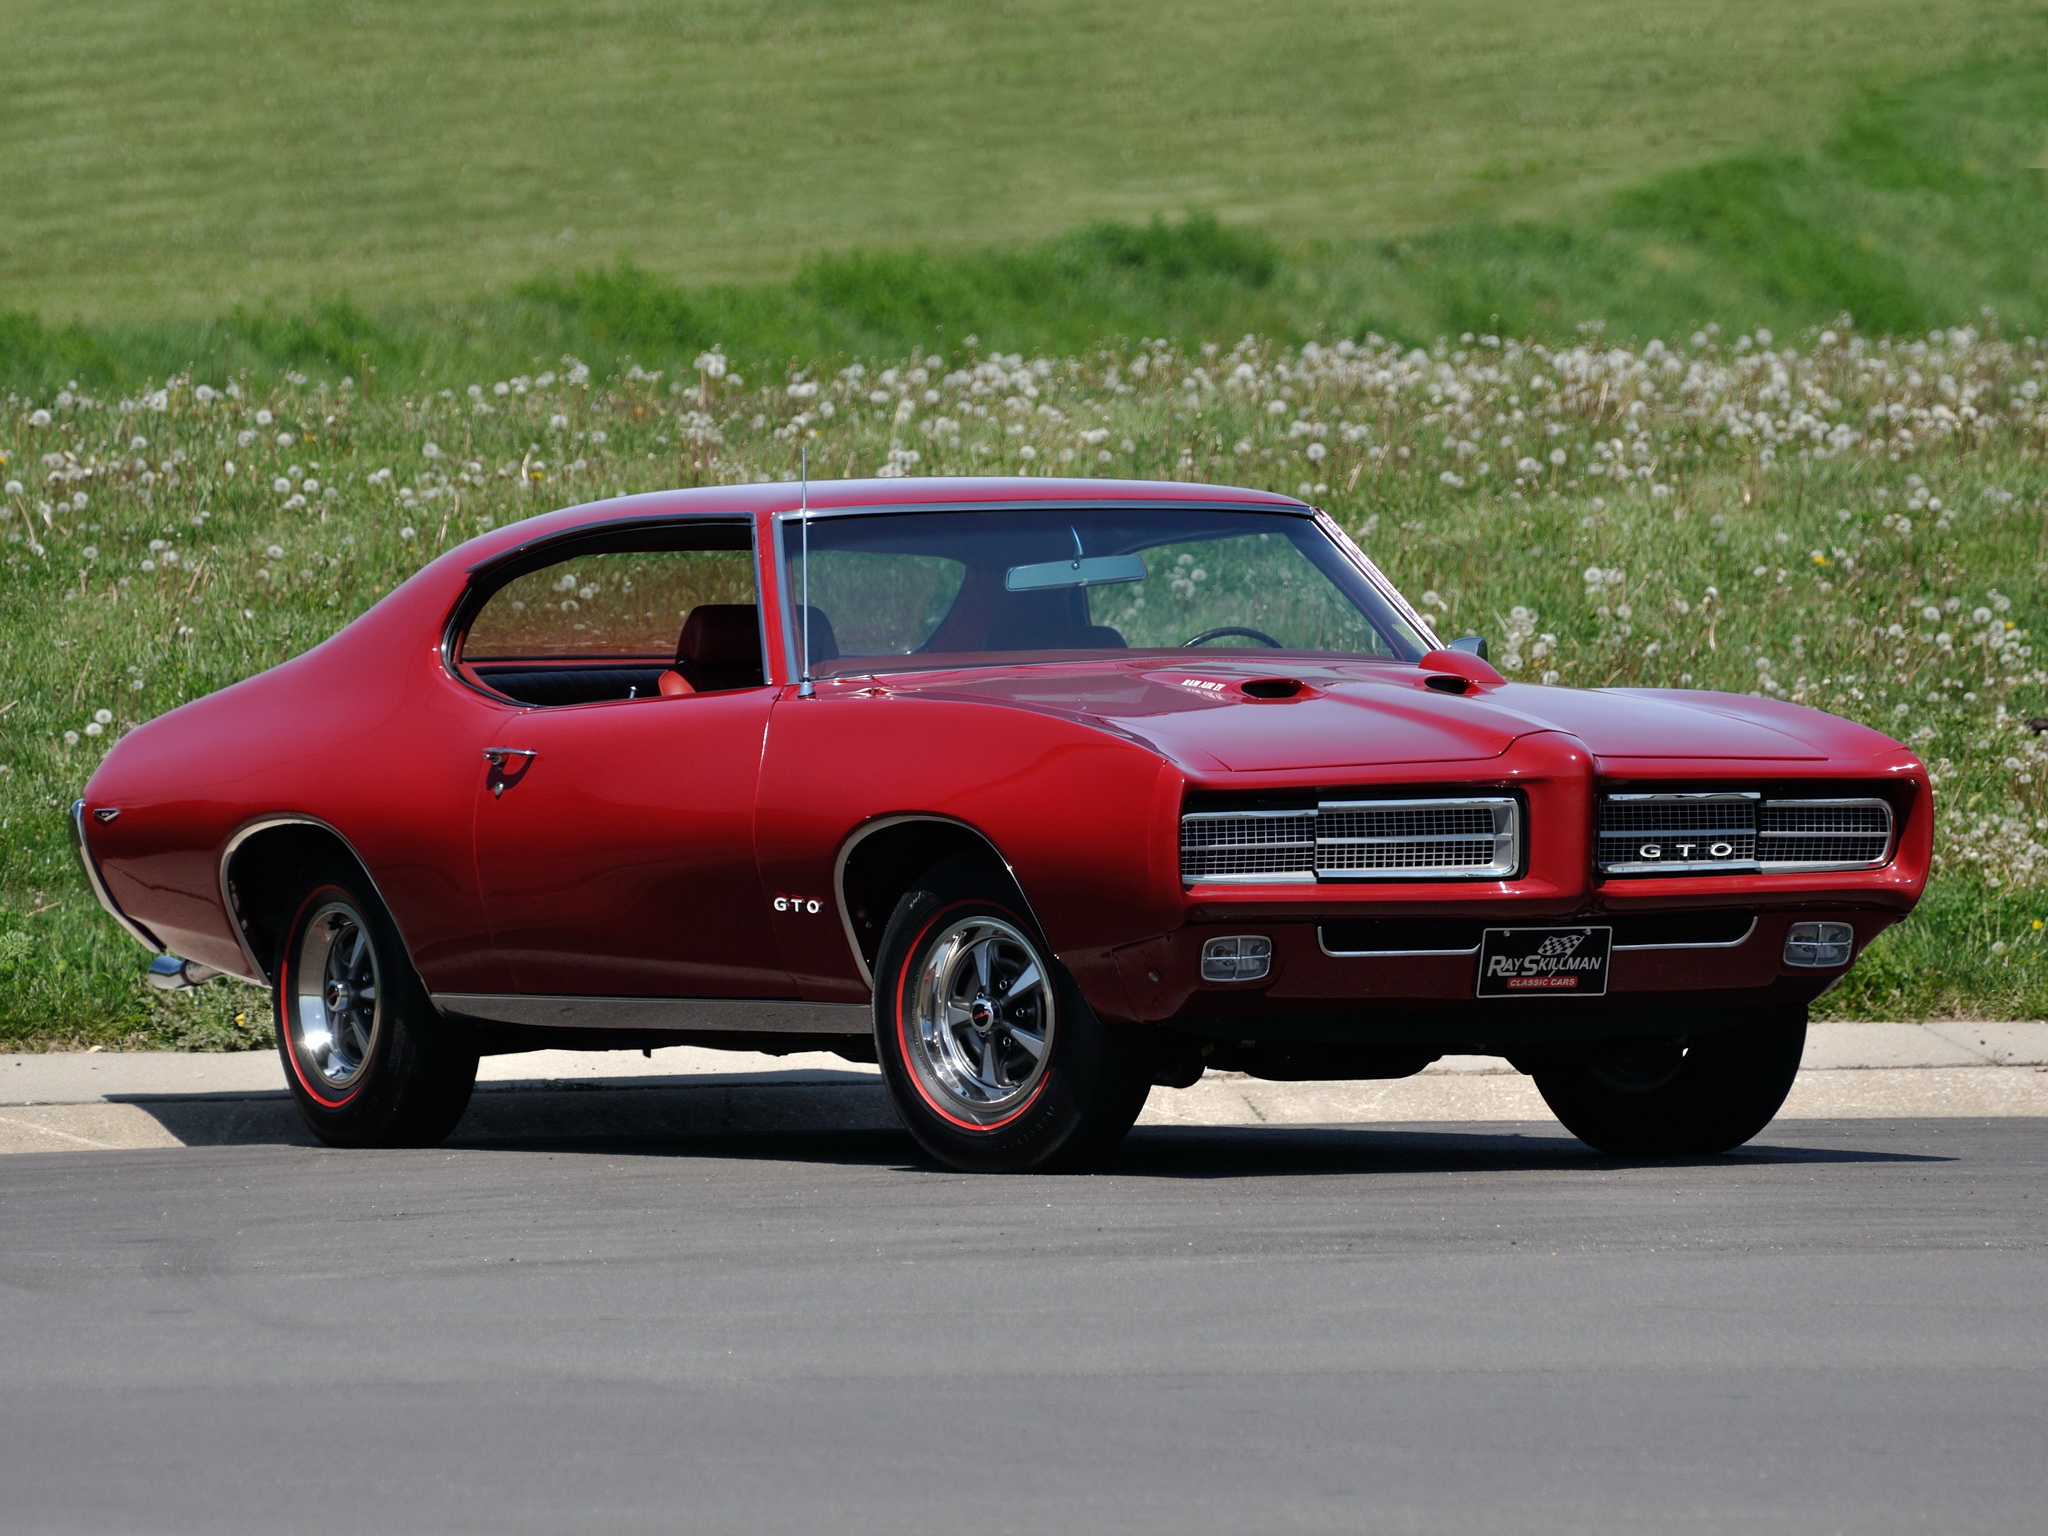 Pontiac Gto Hardtop Coupe Muscle Classic H Wallpaper Background